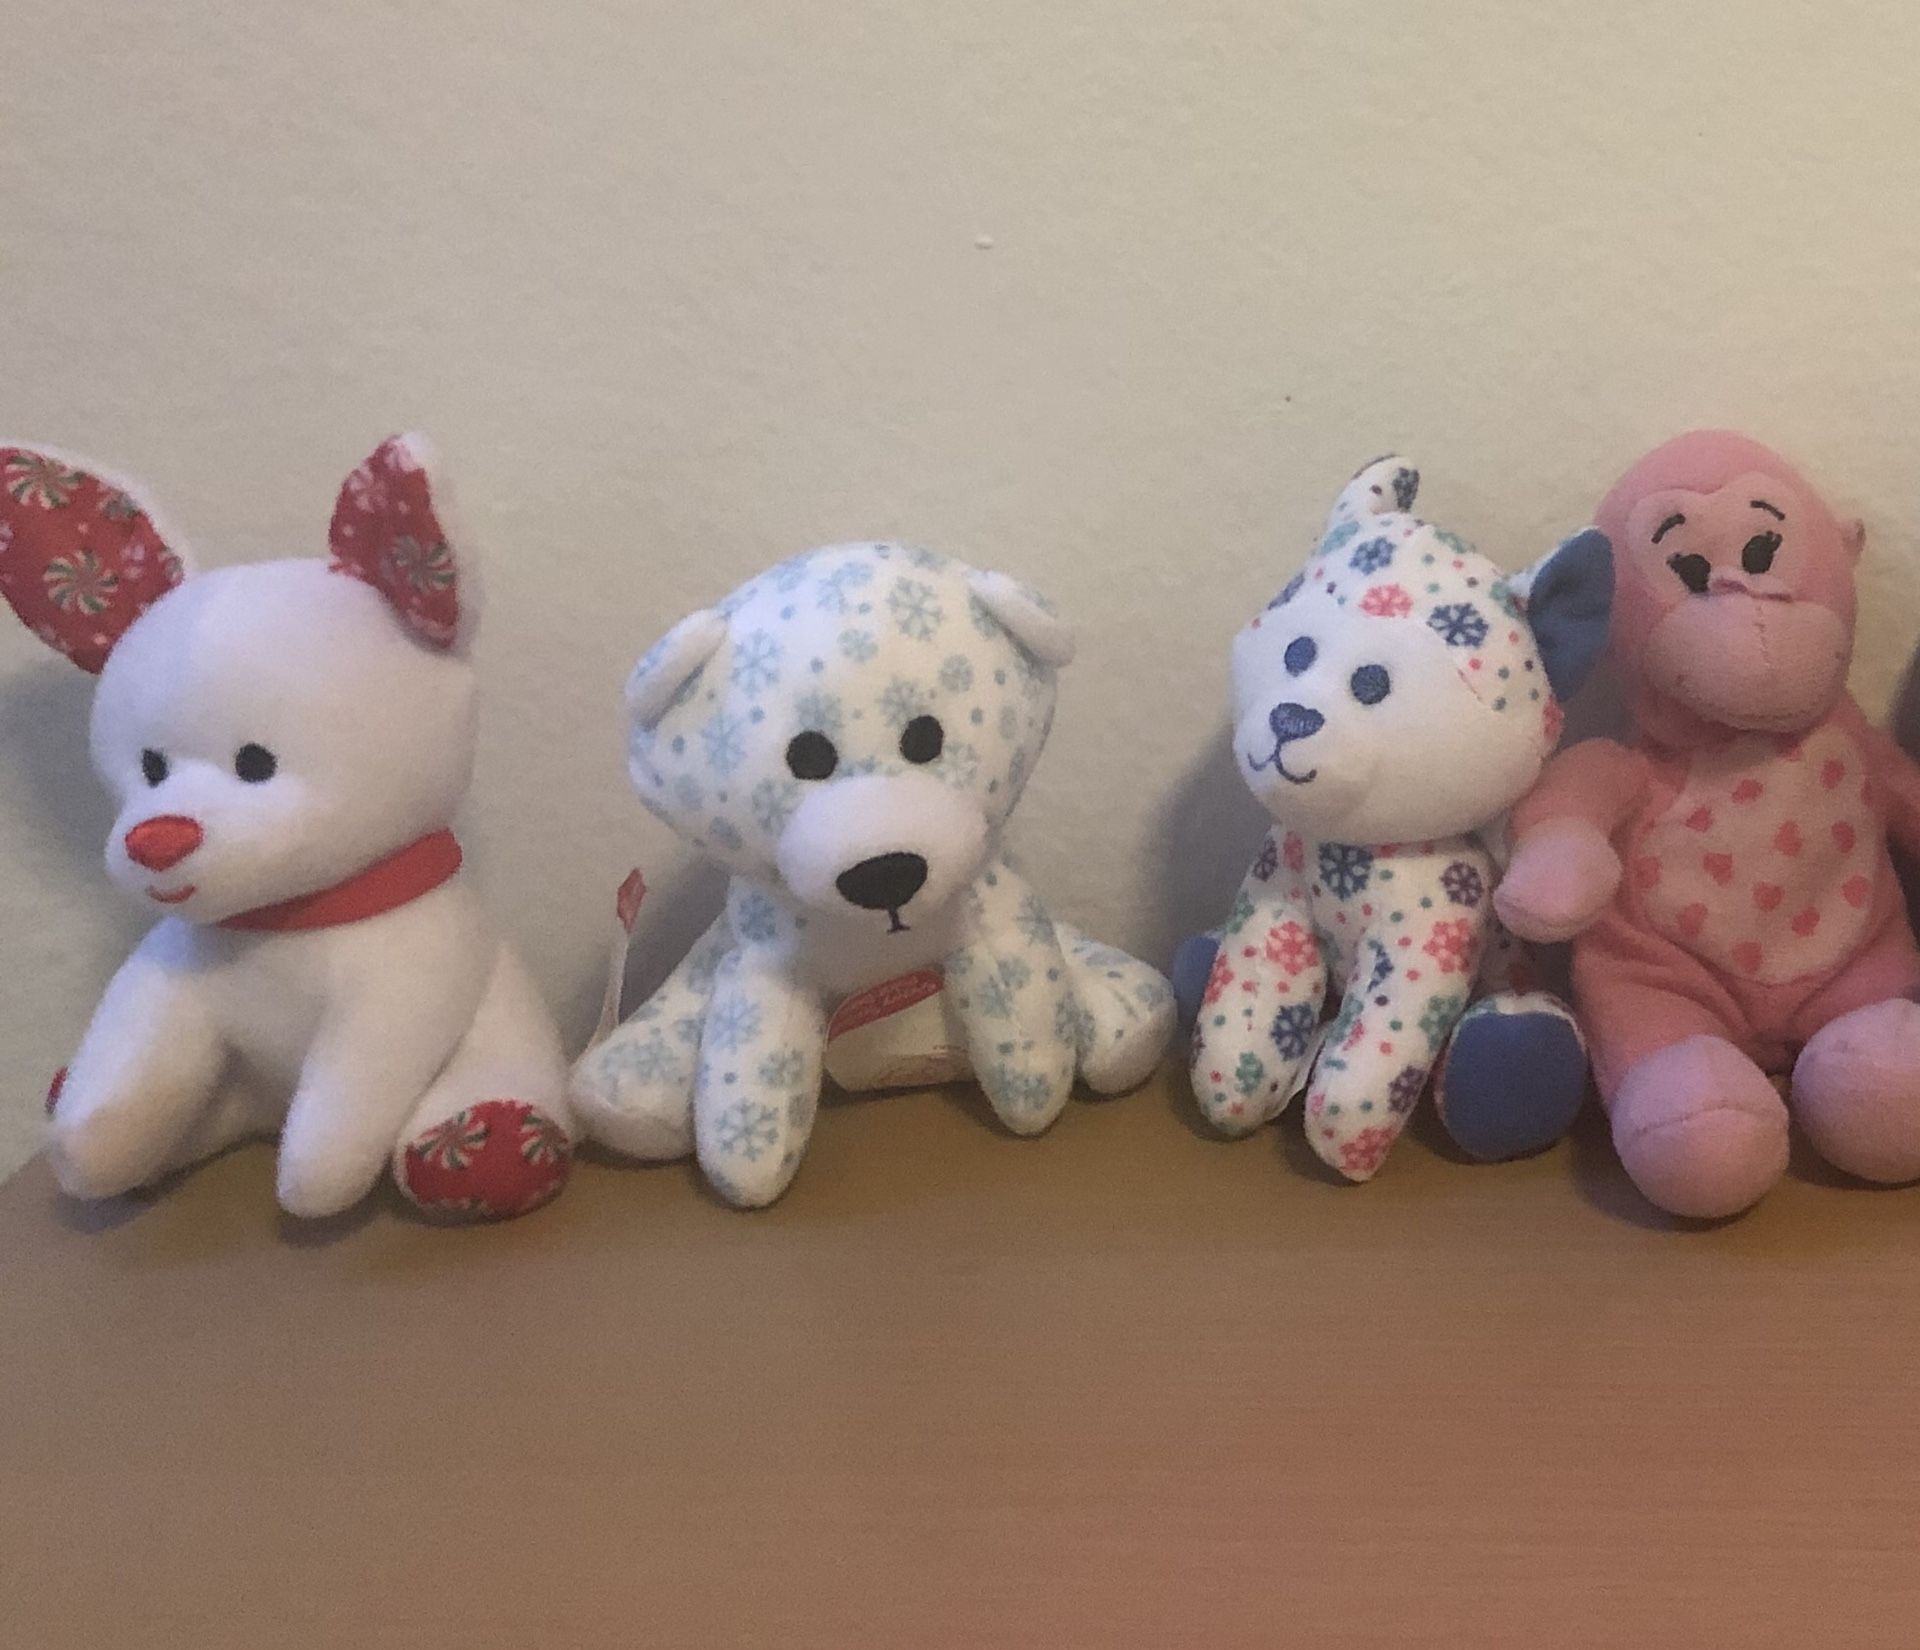 8 New Build-A-Bear Workshop Small Plushies